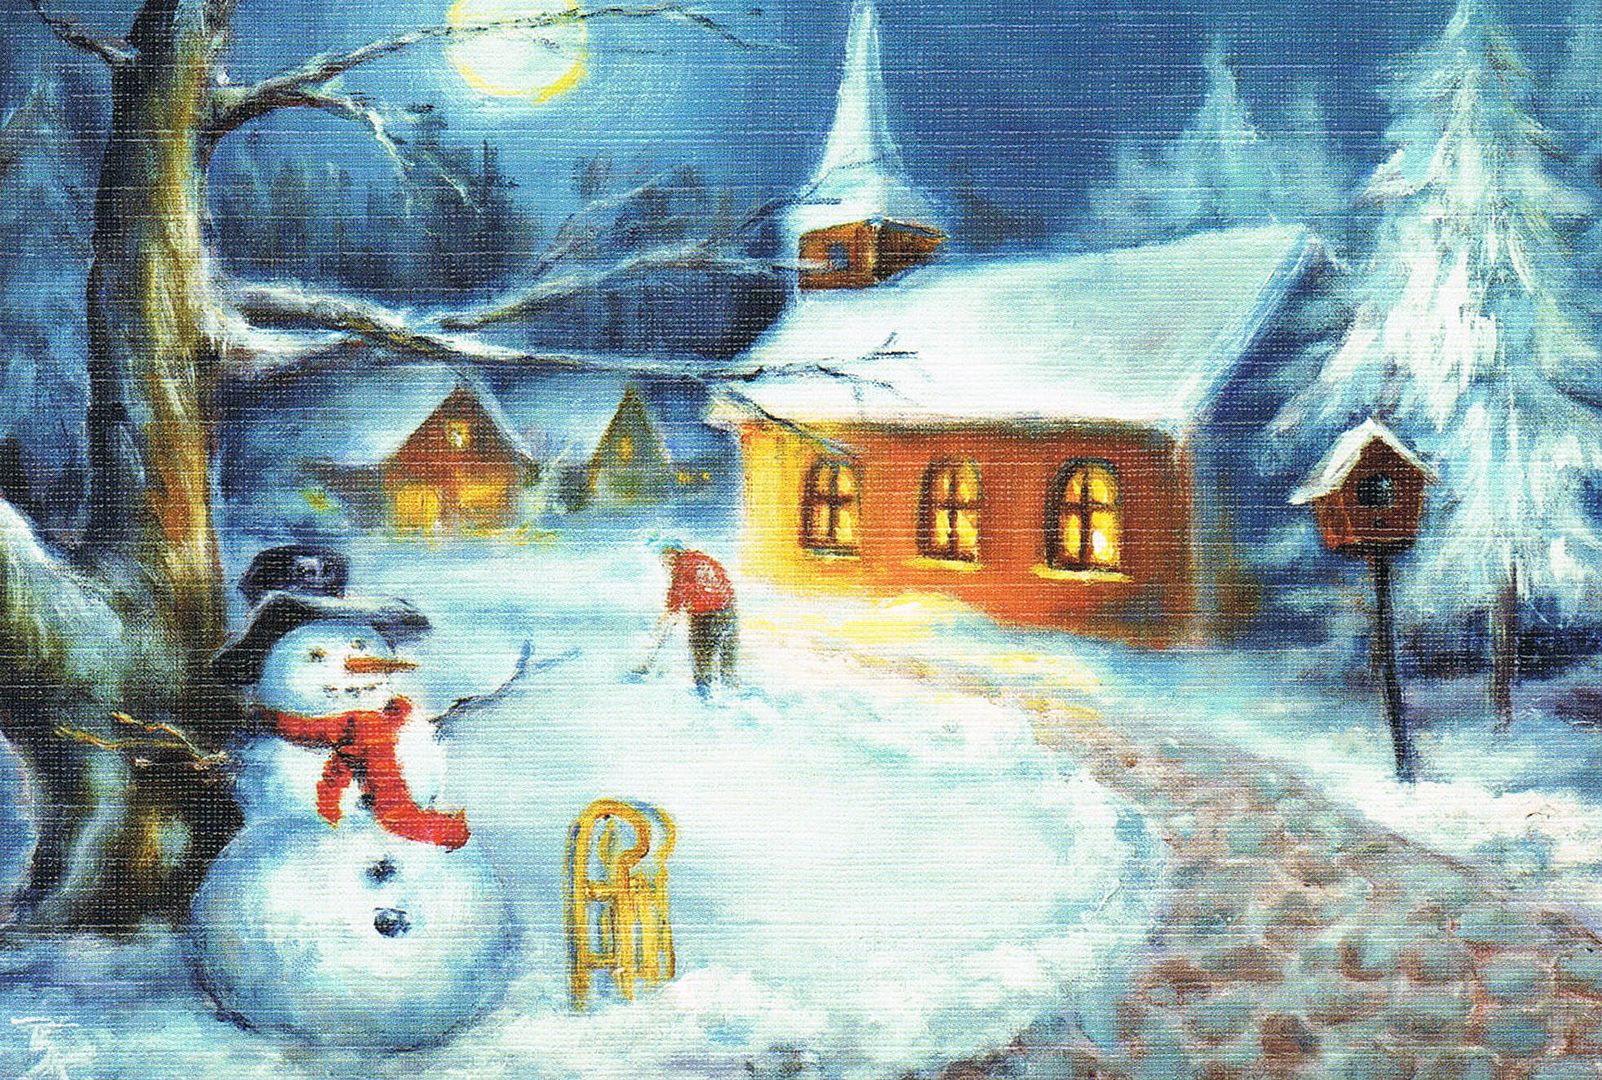 Christmas card scanned in by Angie Ouellette-Tower for https://www.godsgrowinggarden.com/ photo Christmas26_zps3dnqstzh.jpg